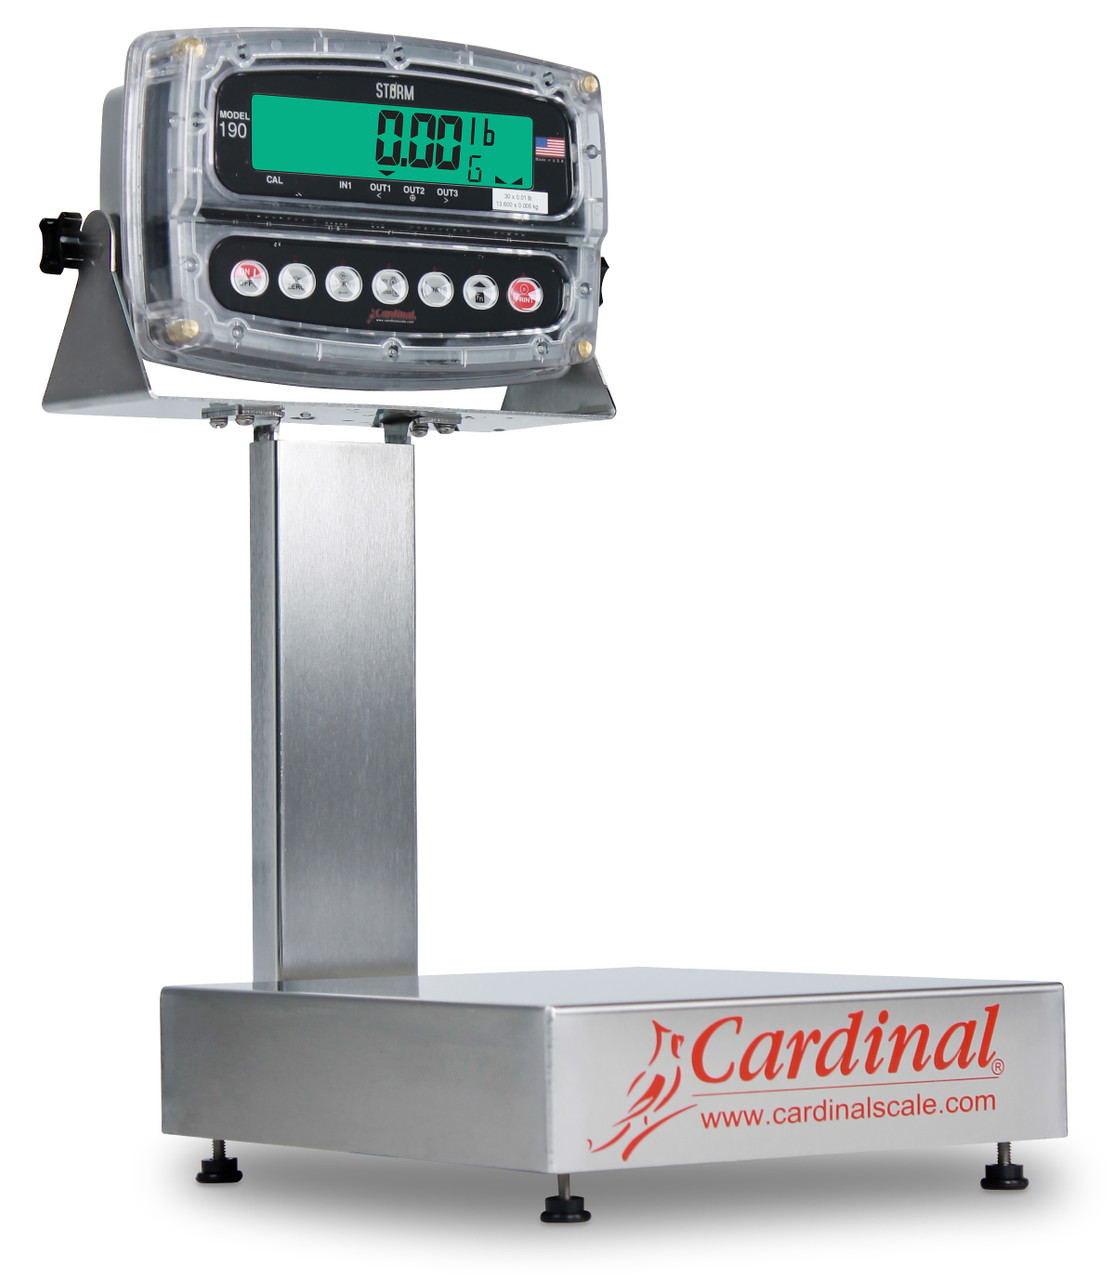 Cardinal Detecto 60 Lb Electronic Bench Scale 16" x 14" Stainless Steel 190 Indicator, Model# EB-60-190